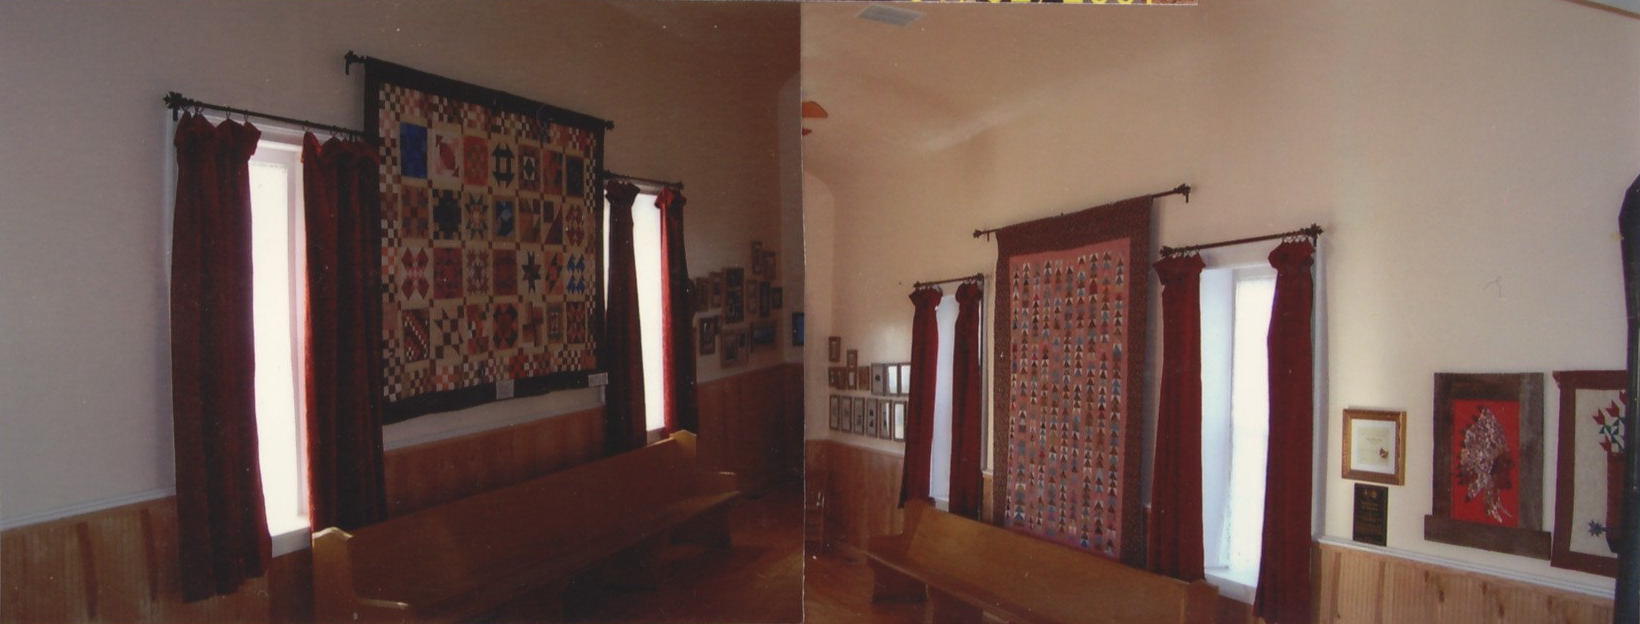 Photo of the inside of the Toquerville Church